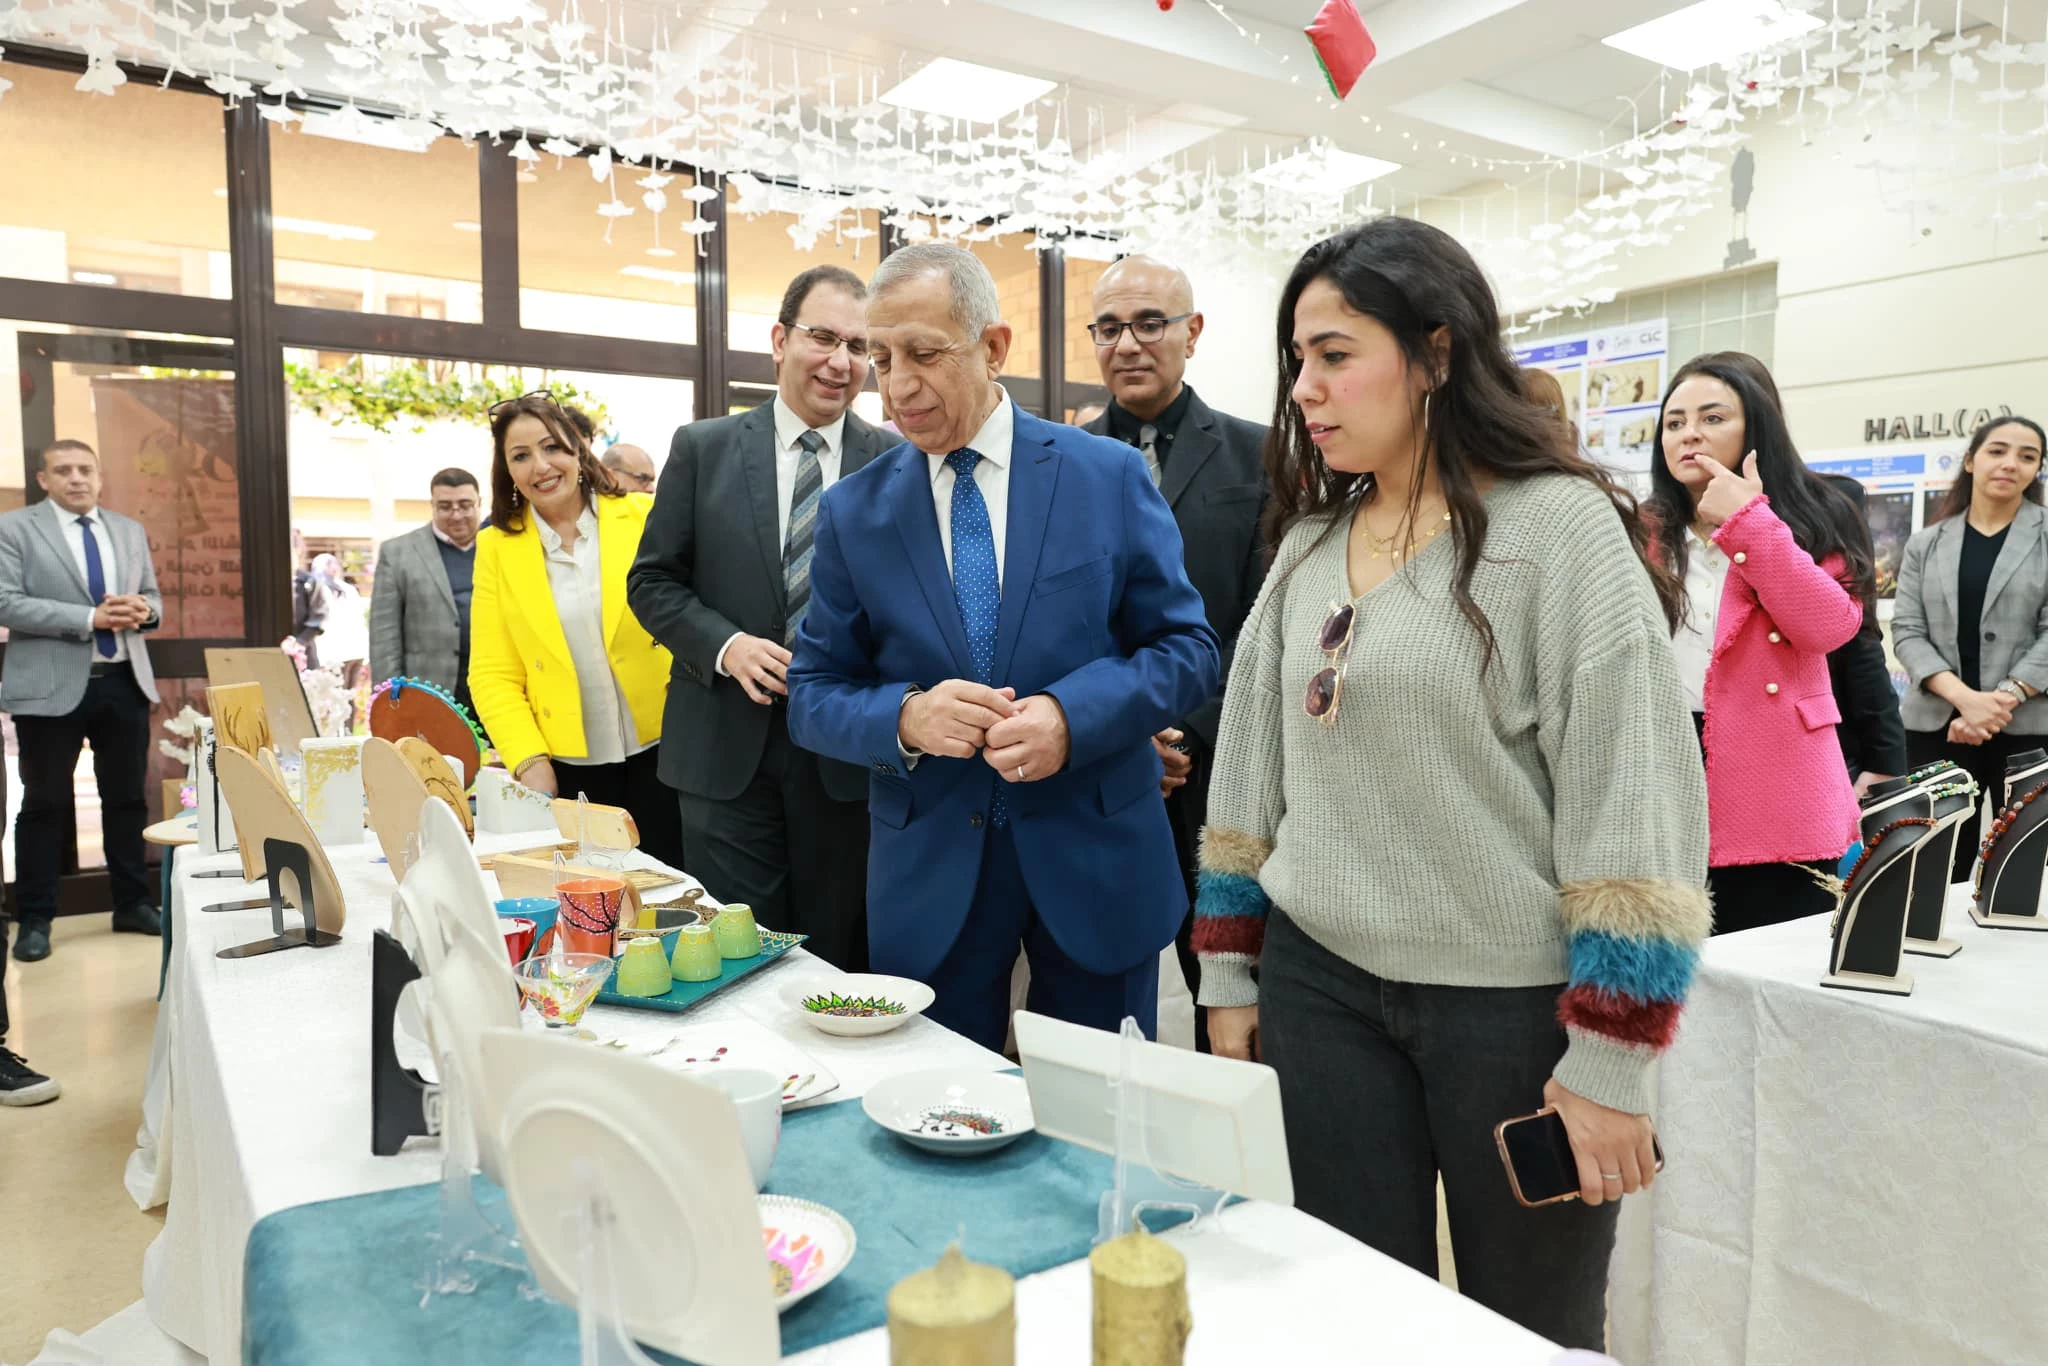 His Excellency Professor Dr., President of the Arab Academy for Science, Technology and Maritime Transport, opened the closing ceremony of activities and the exhibition of fine arts and handicrafts for students of the Faculties of Management, Technology, Language and Media in Miami on: 1/4/20244